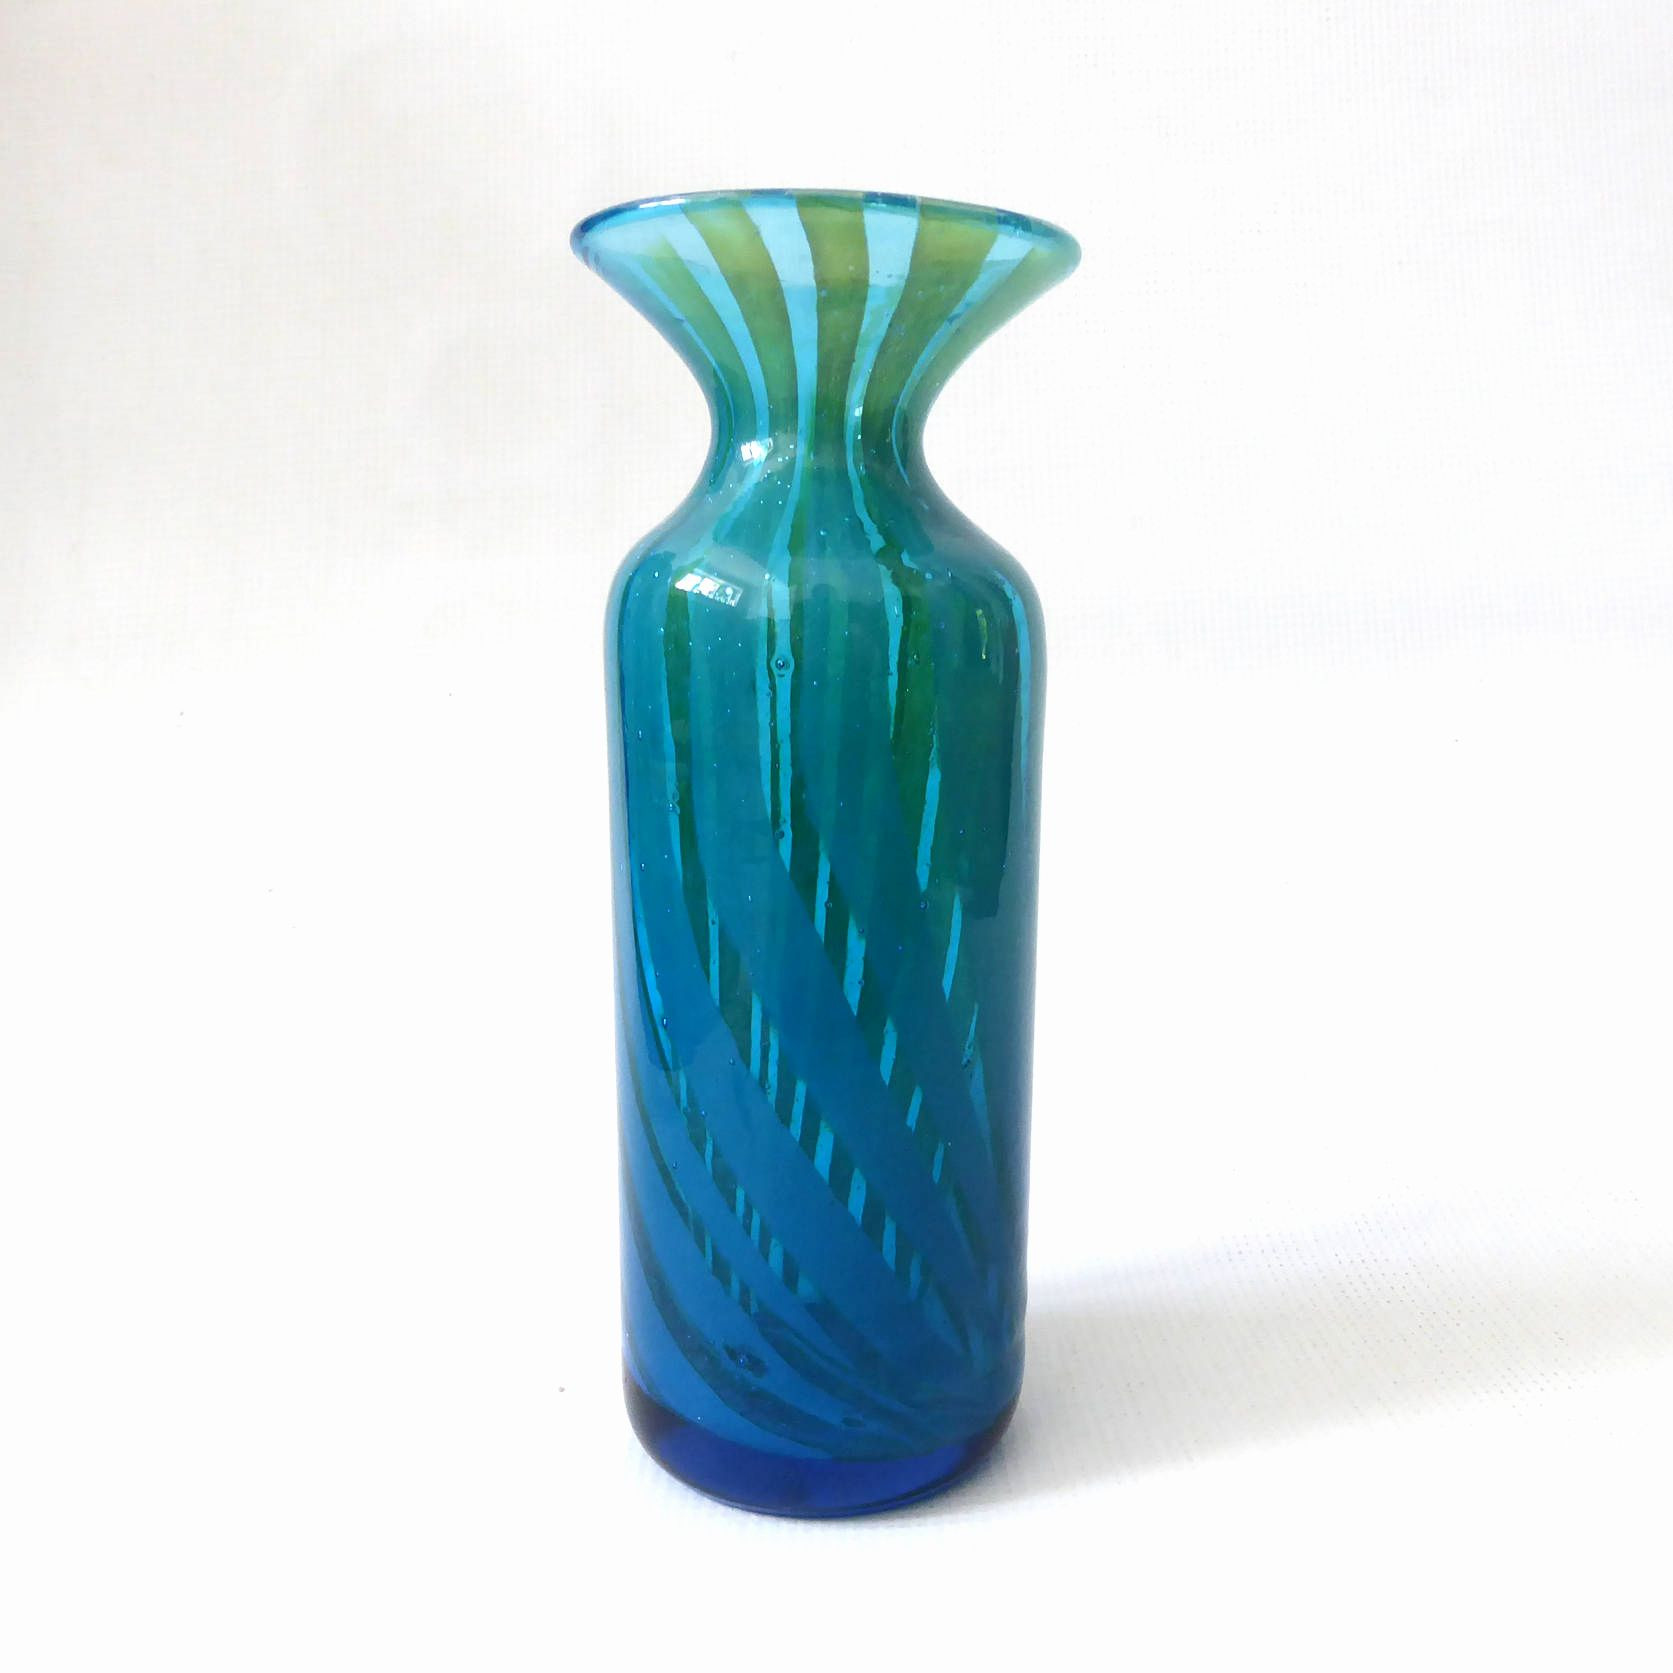 21 Recommended How to Identify Murano Glass Vase 2024 free download how to identify murano glass vase of 35 antique green glass vases the weekly world within antique glass vases identify vase and cellar image avorcor